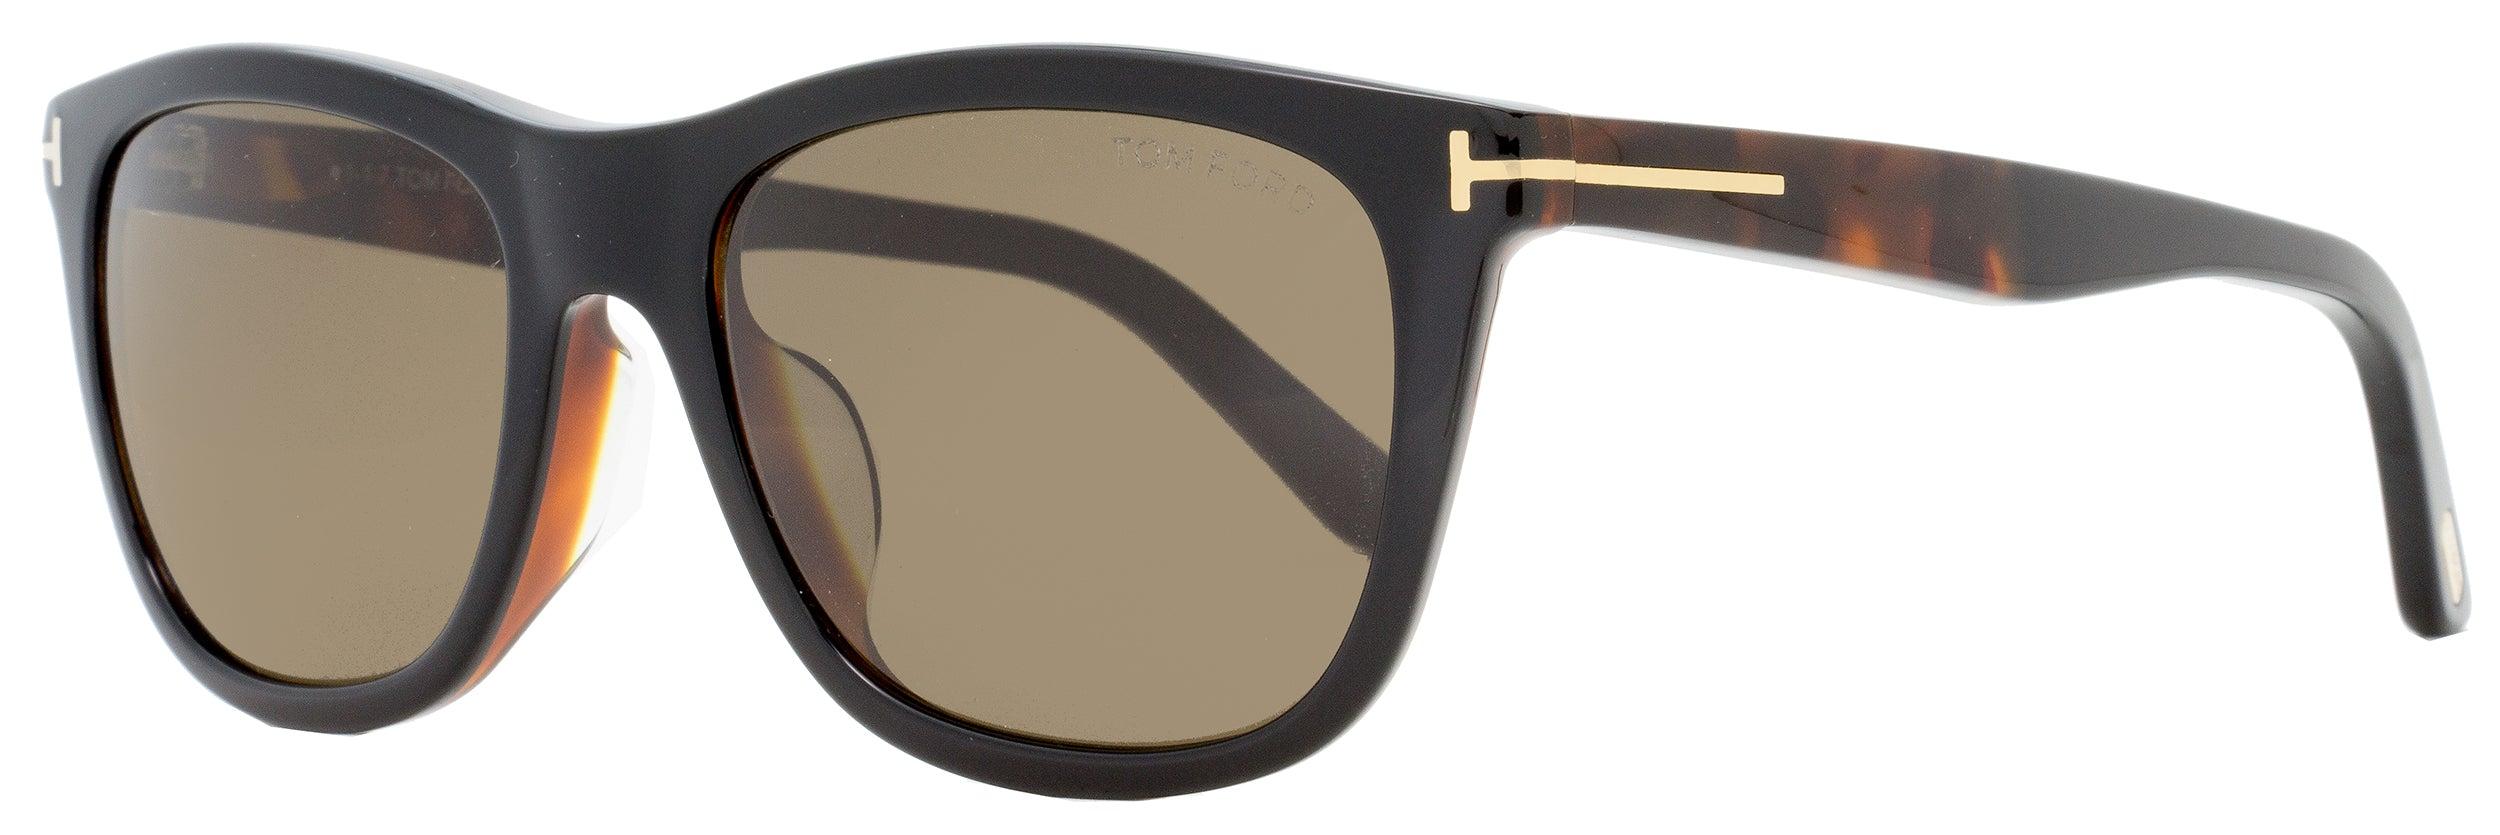 Andrew Tom Ford Sunglasses TF 500